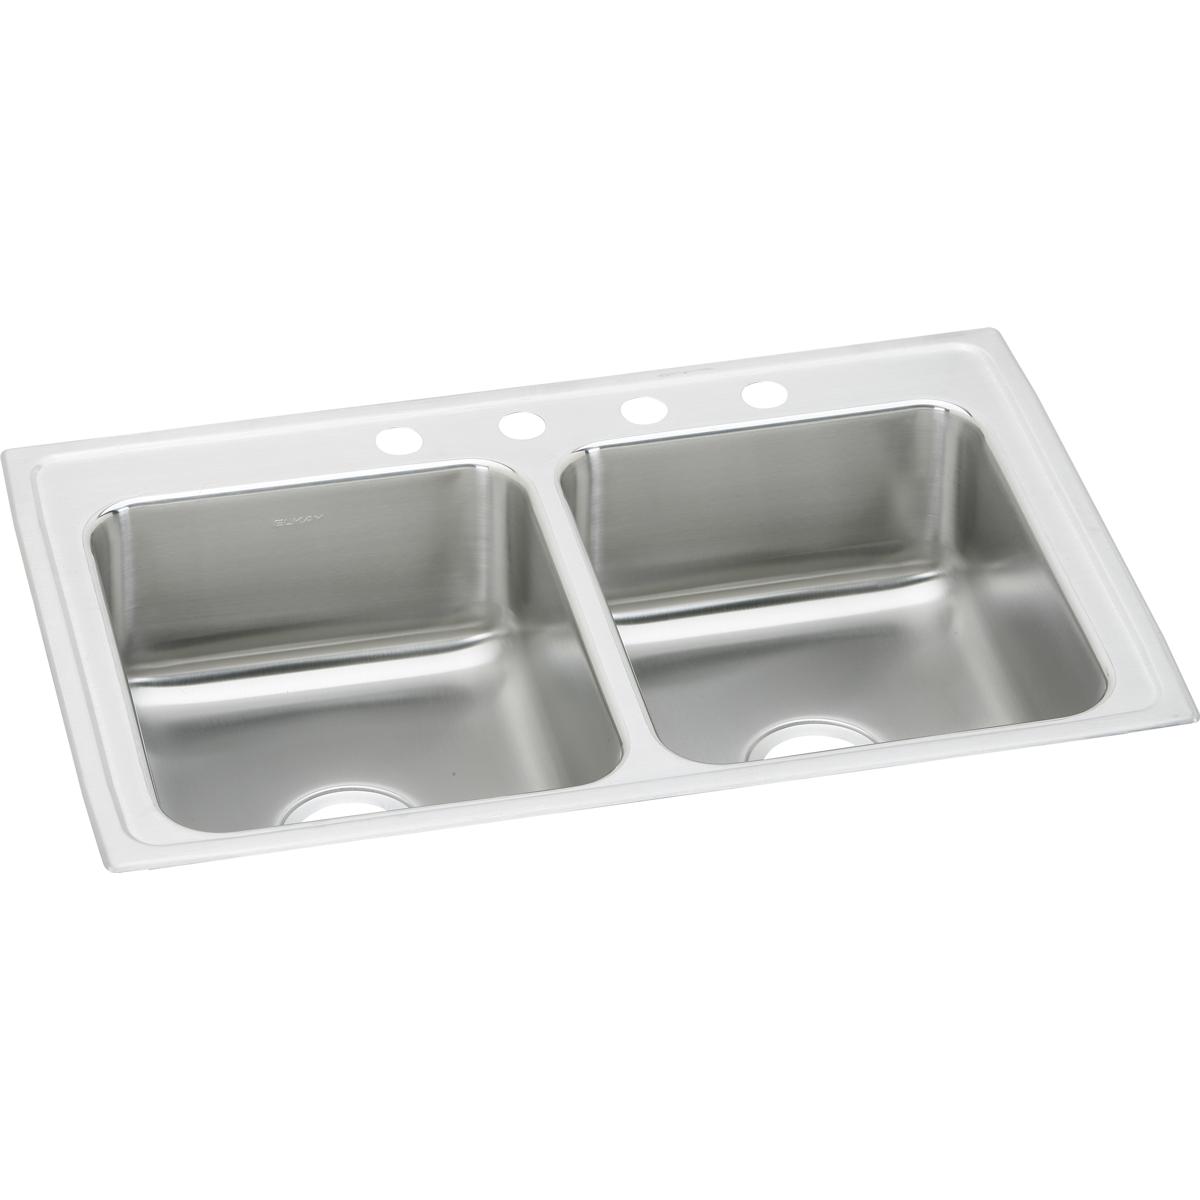 Elkay Lustertone Classic 43" x 22" x 7-5/8" Stainless Steel Equal Double Bowl Drop-in Sink